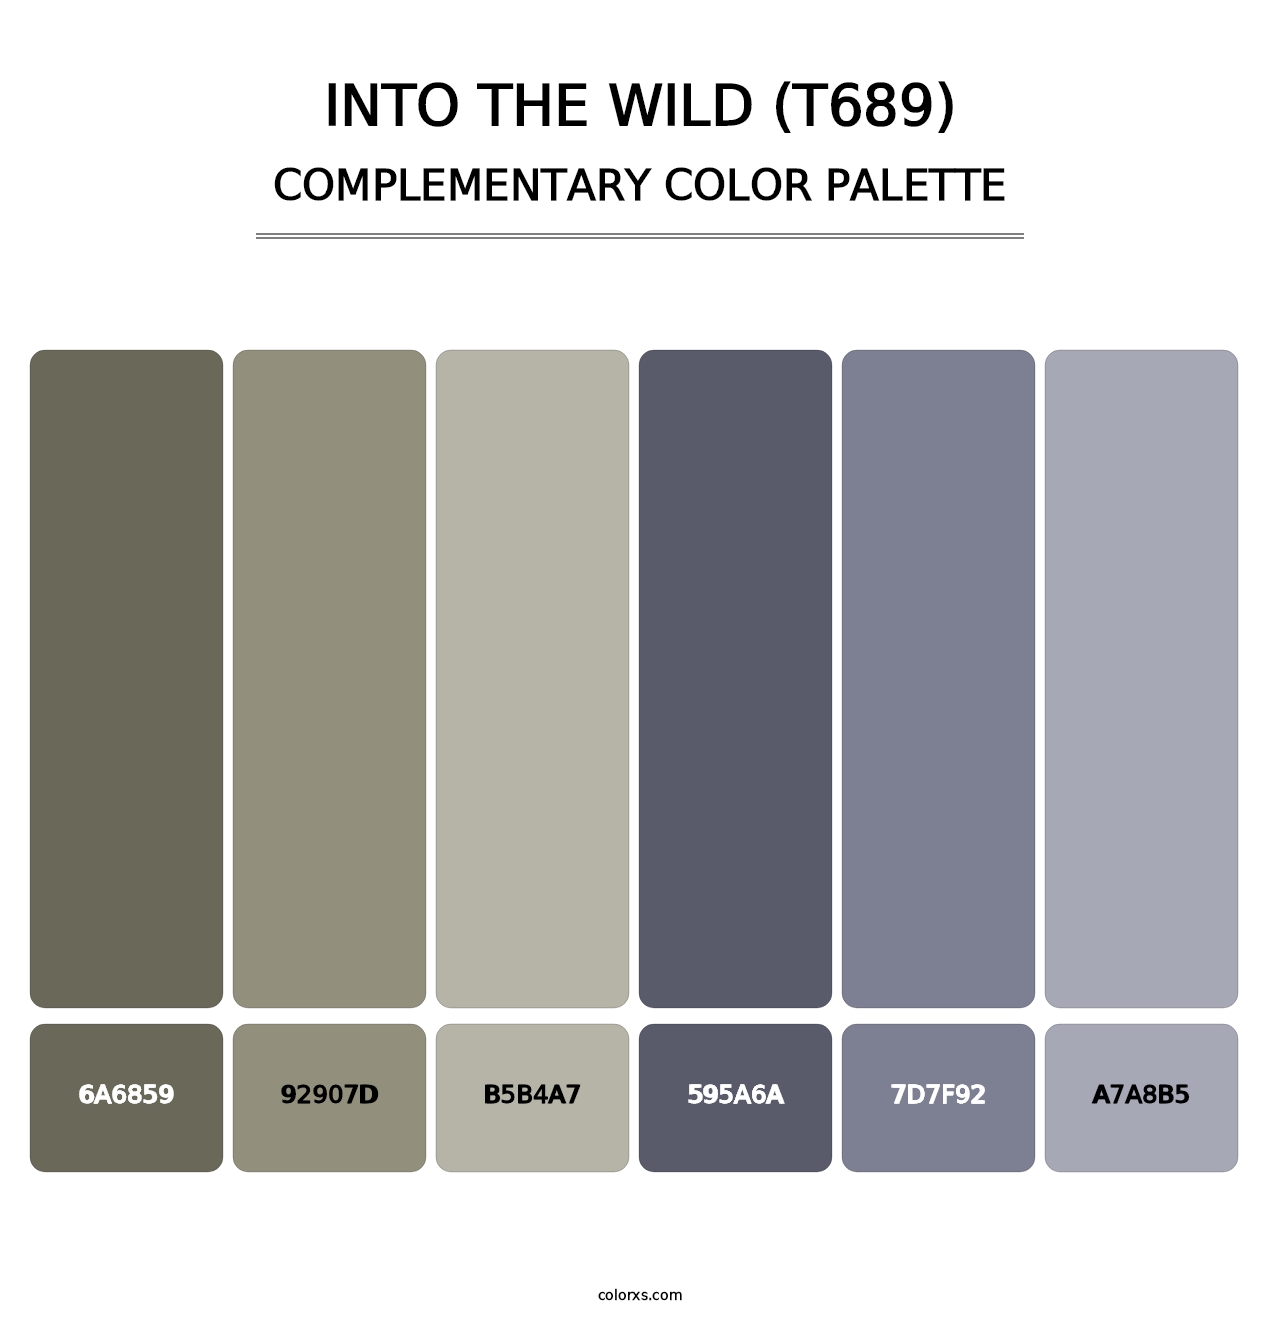 Into the Wild (T689) - Complementary Color Palette